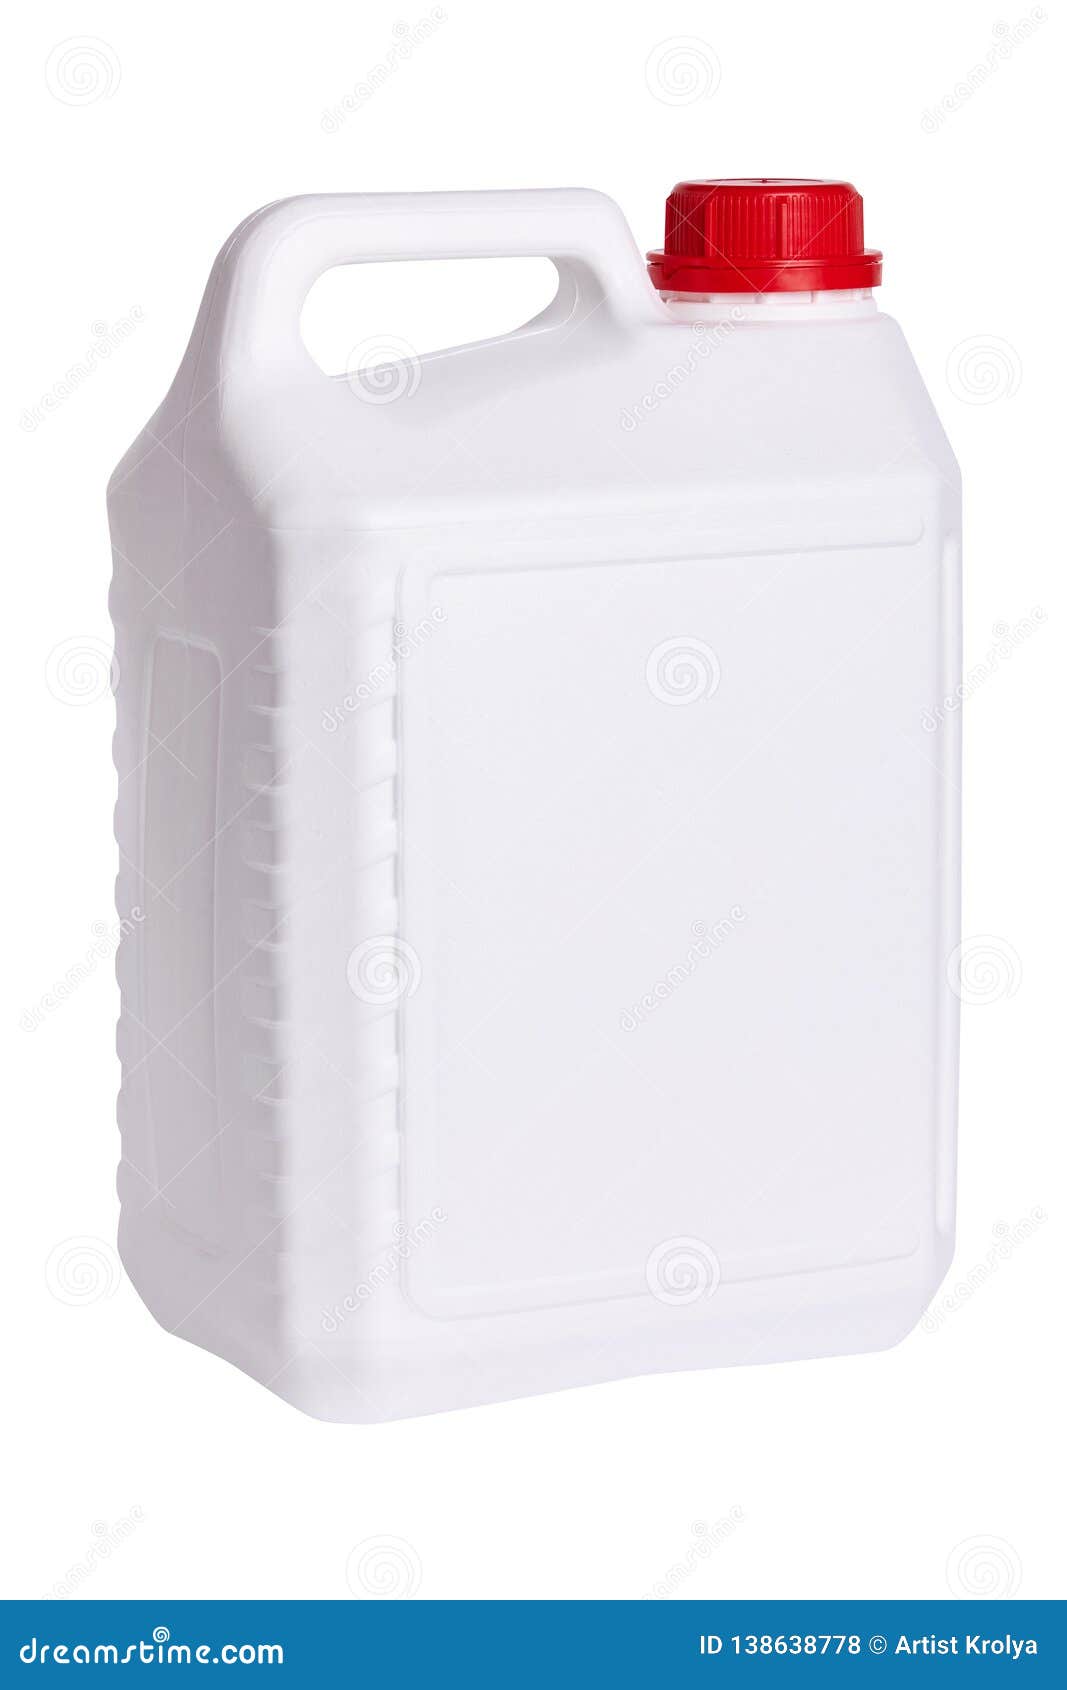 Close Up Of A White Container On White Background Stock Photo - Image ...